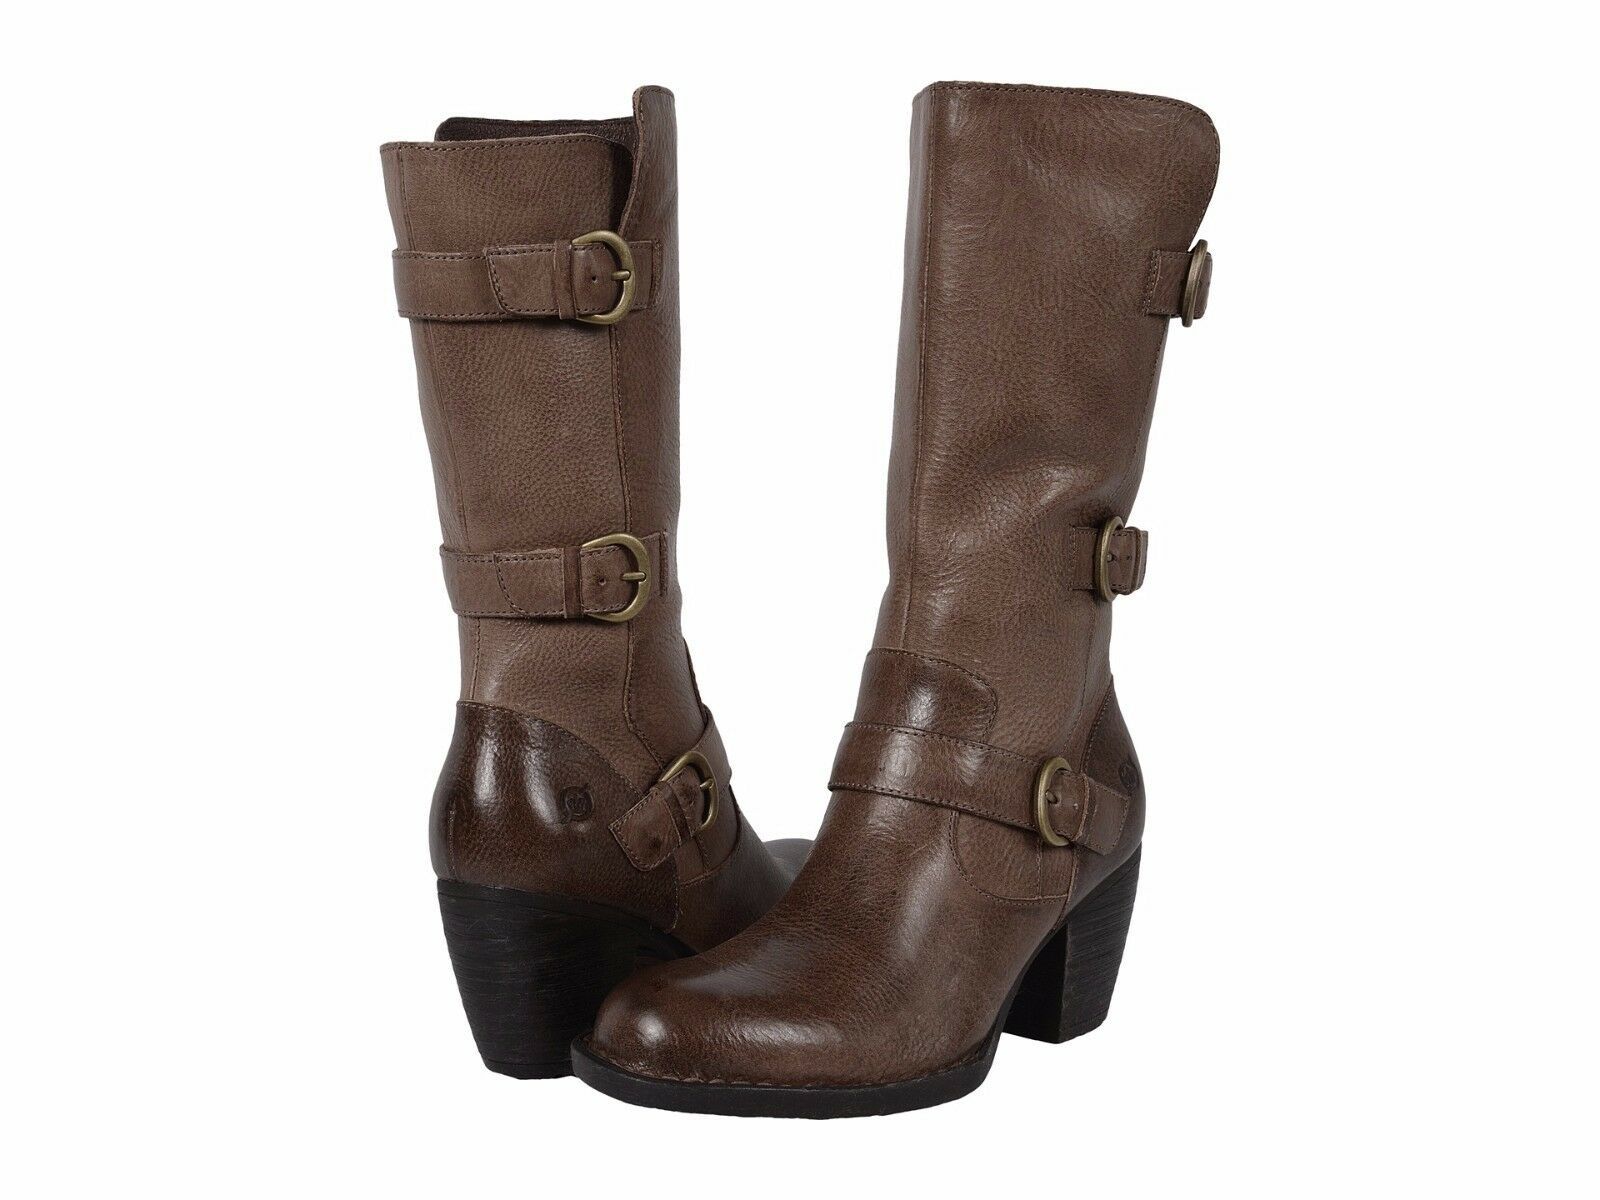 New Born Maleri Women's Leather Boots Variety Color & Sizes